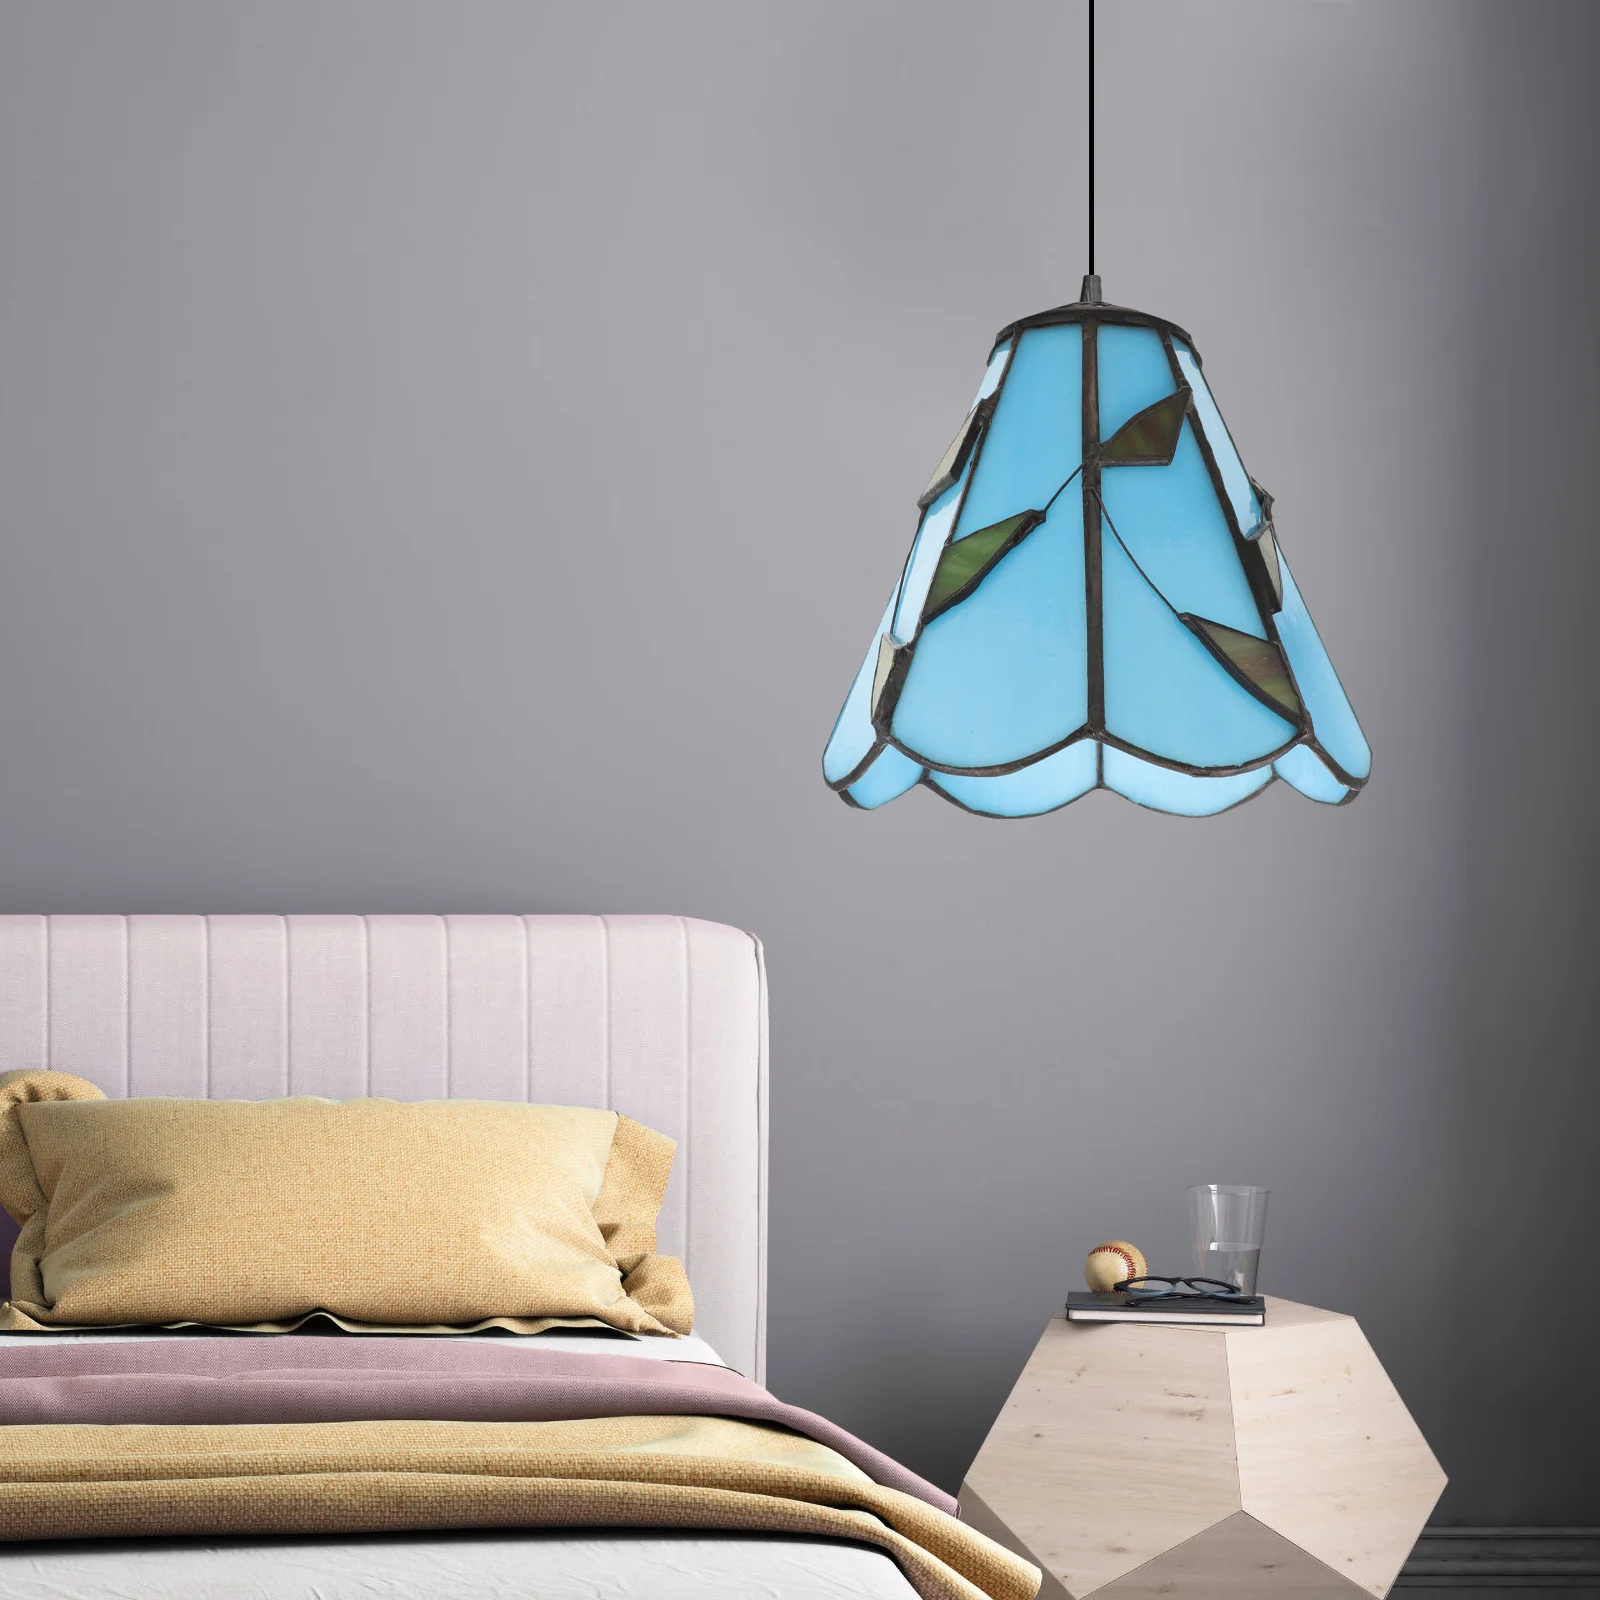 

Glass Lampshades Style Small Lampshade Stained Glass Fan Shades Pendant Lamp Shade Chandelier Lamp Shades Replacement Wall Light